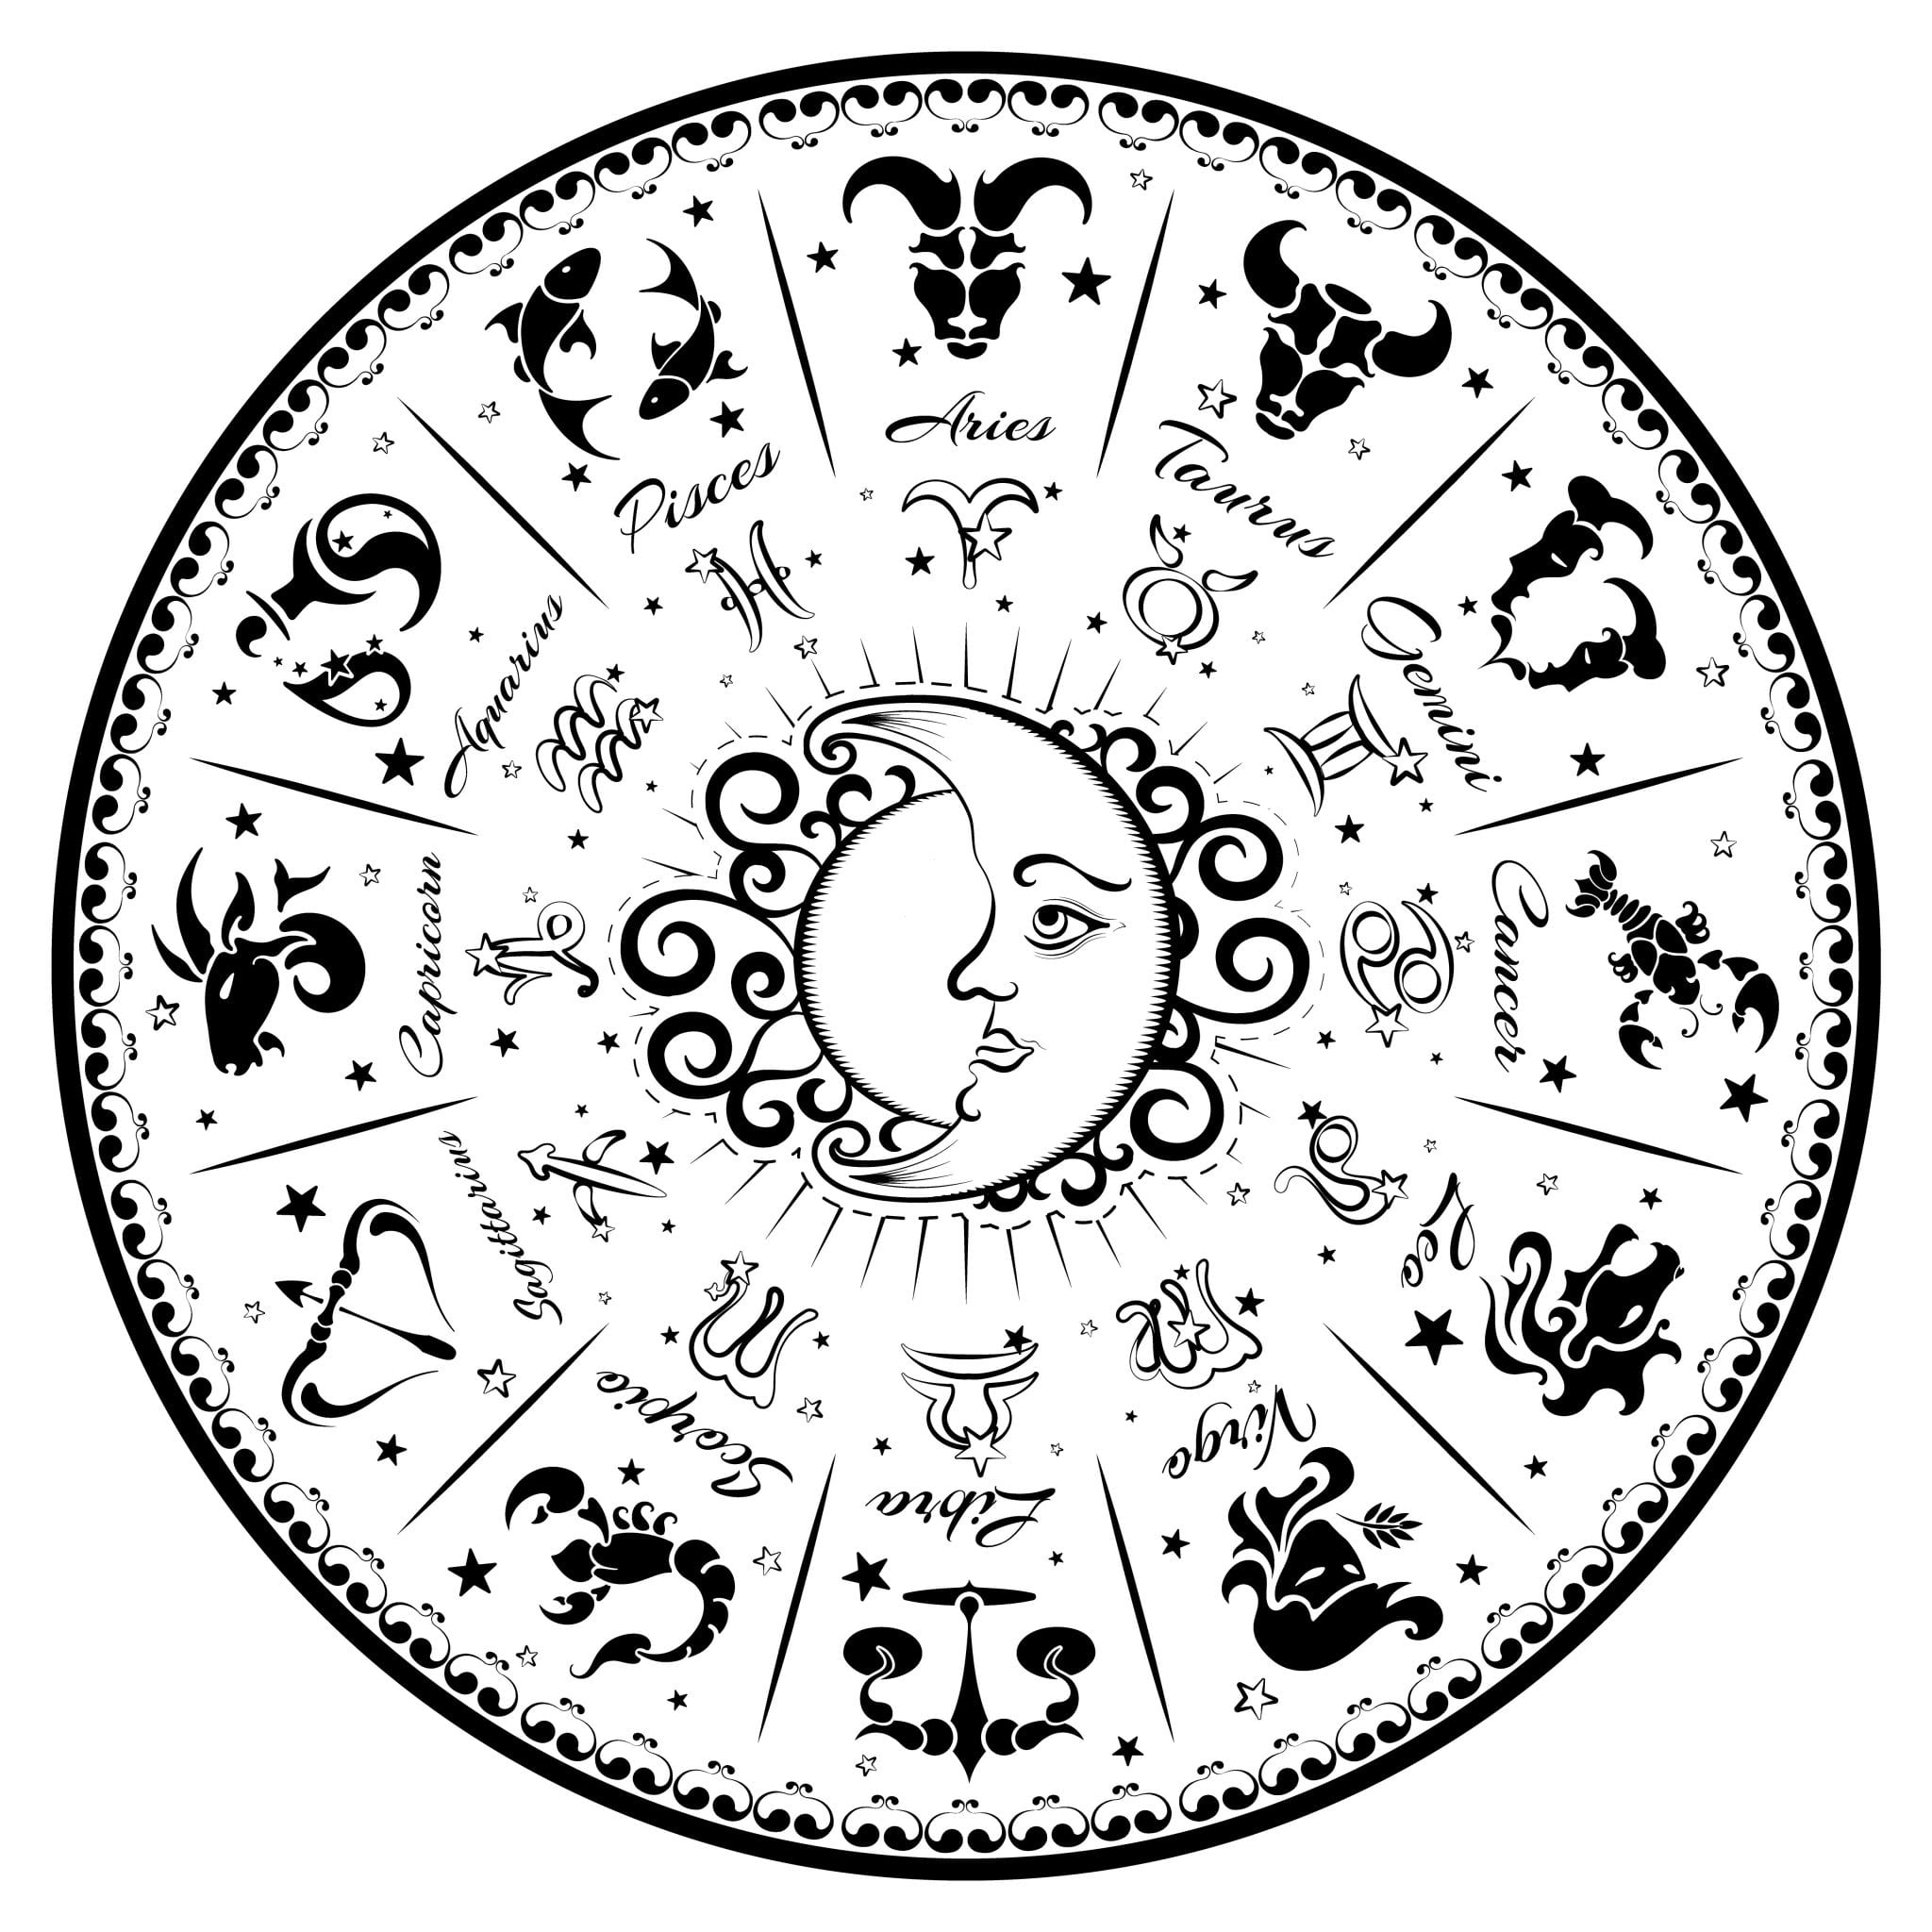 darkside of the astrology moon signs